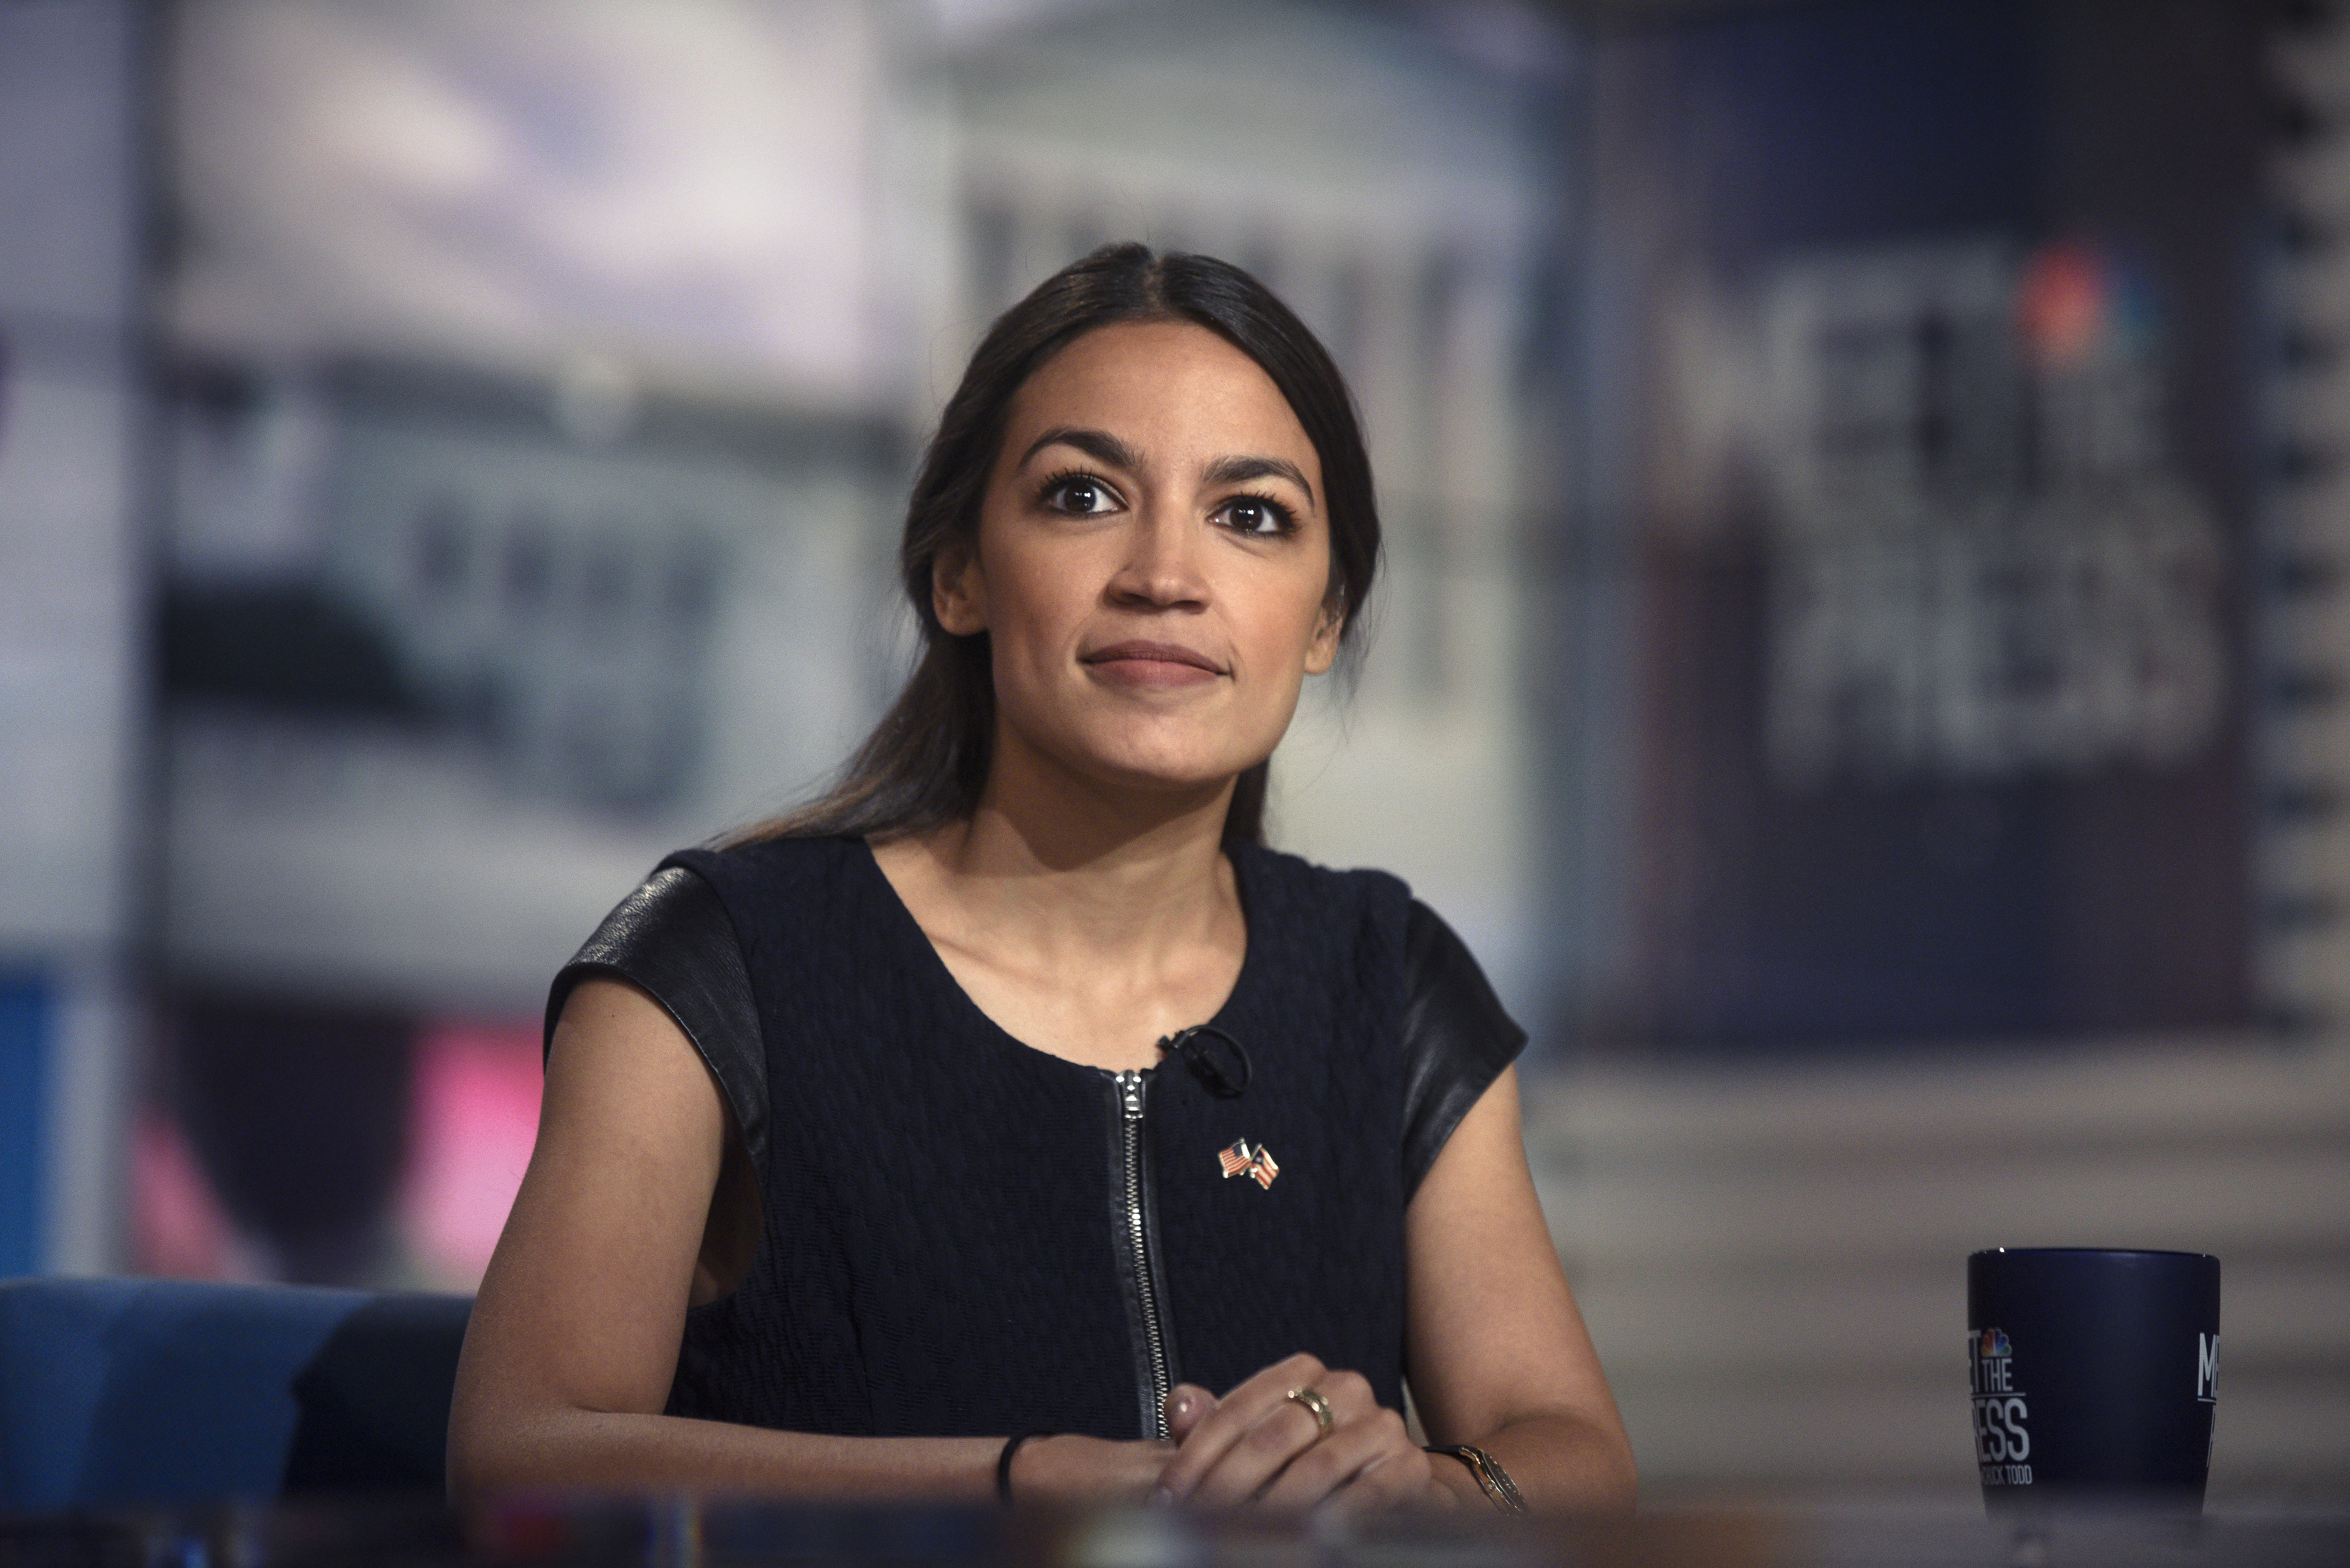 Alexandria Ocasio-Cortez, Democratic Nominee for New York's 14th Congressional District, appears on "Meet the Press" in Washington, D.C., Sunday, July 1, 2018. (William B. Plowman—NBC NewsWire/Getty Images)